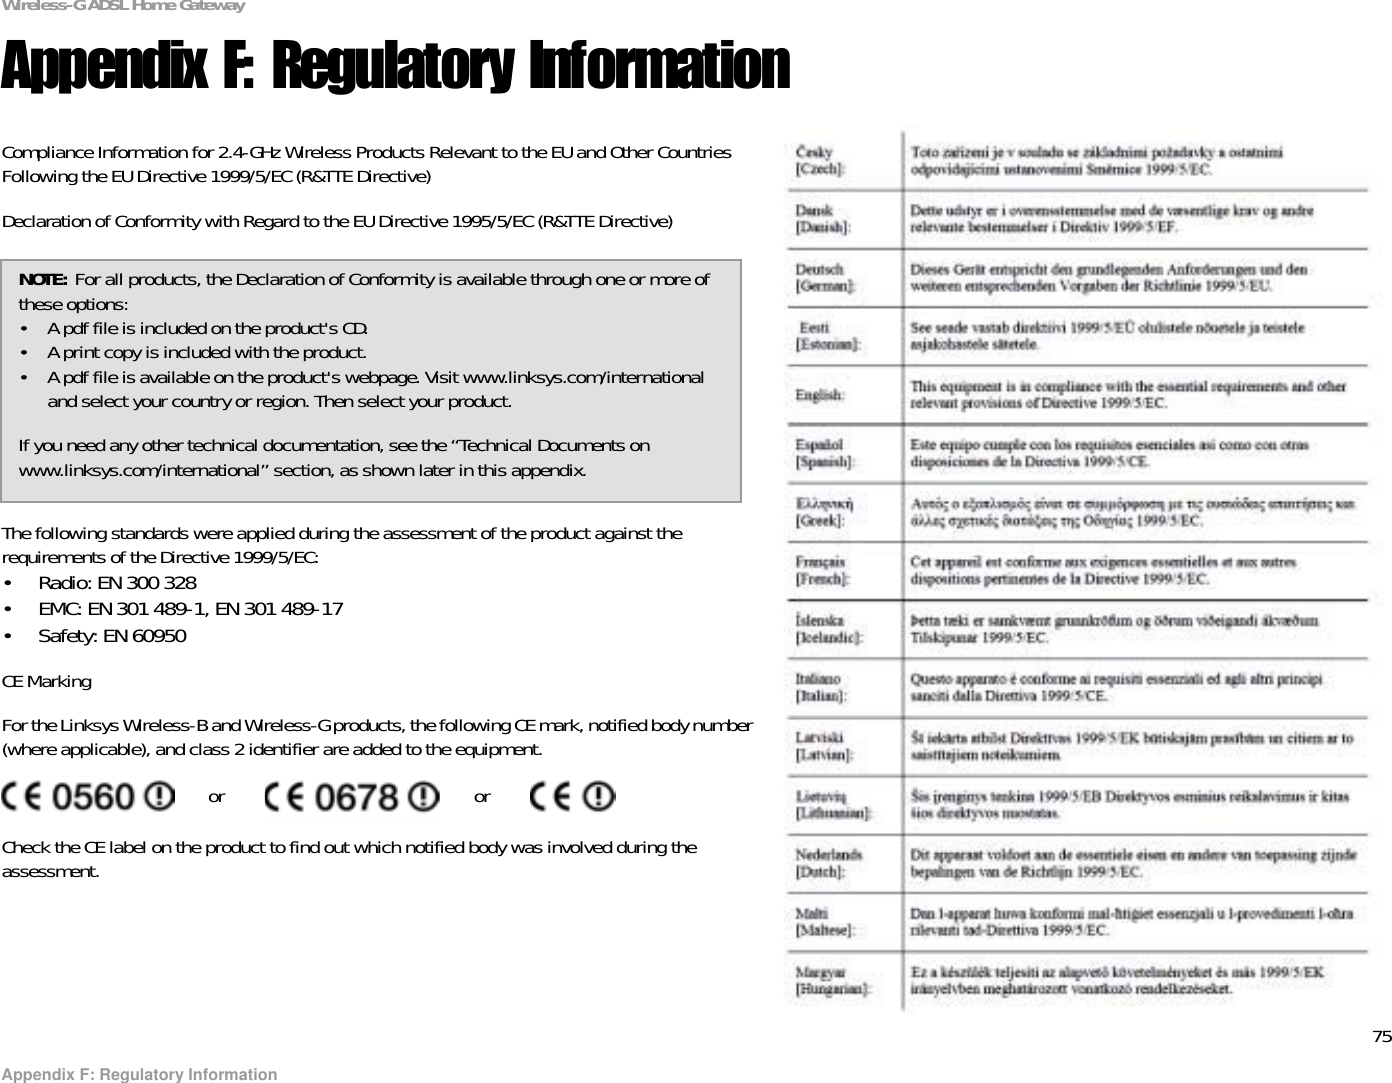 75Appendix F: Regulatory InformationWireless-G ADSL Home GatewayAppendix F: Regulatory InformationCompliance Information for 2.4-GHz Wireless Products Relevant to the EU and Other Countries Following the EU Directive 1999/5/EC (R&amp;TTE Directive)Declaration of Conformity with Regard to the EU Directive 1995/5/EC (R&amp;TTE Directive)The following standards were applied during the assessment of the product against the requirements of the Directive 1999/5/EC:• Radio: EN 300 328• EMC: EN 301 489-1, EN 301 489-17• Safety: EN 60950CE MarkingFor the Linksys Wireless-B and Wireless-G products, the following CE mark, notified body number (where applicable), and class 2 identifier are added to the equipment.Check the CE label on the product to find out which notified body was involved during the assessment.or orNOTE: For all products, the Declaration of Conformity is available through one or more of these options:• A pdf file is included on the product&apos;s CD.• A print copy is included with the product.• A pdf file is available on the product&apos;s webpage. Visit www.linksys.com/international and select your country or region. Then select your product.If you need any other technical documentation, see the “Technical Documents on www.linksys.com/international” section, as shown later in this appendix.